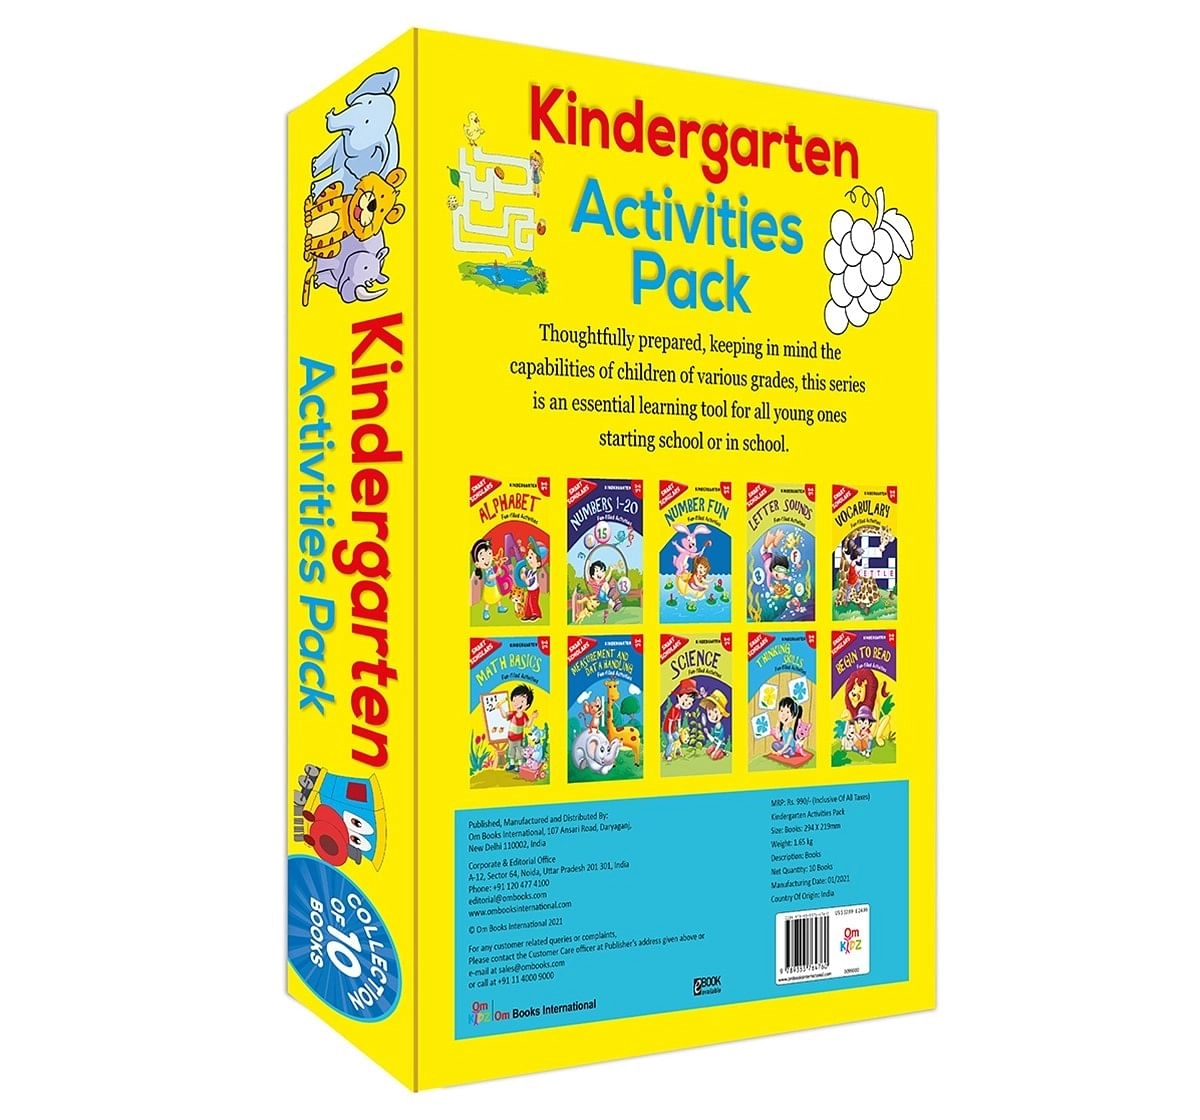 Kindergarten Activities Pack Smart Scholars, 320 Pages Book By Om Books Editorial Team, Paperback ( Collection Of 10 Books)